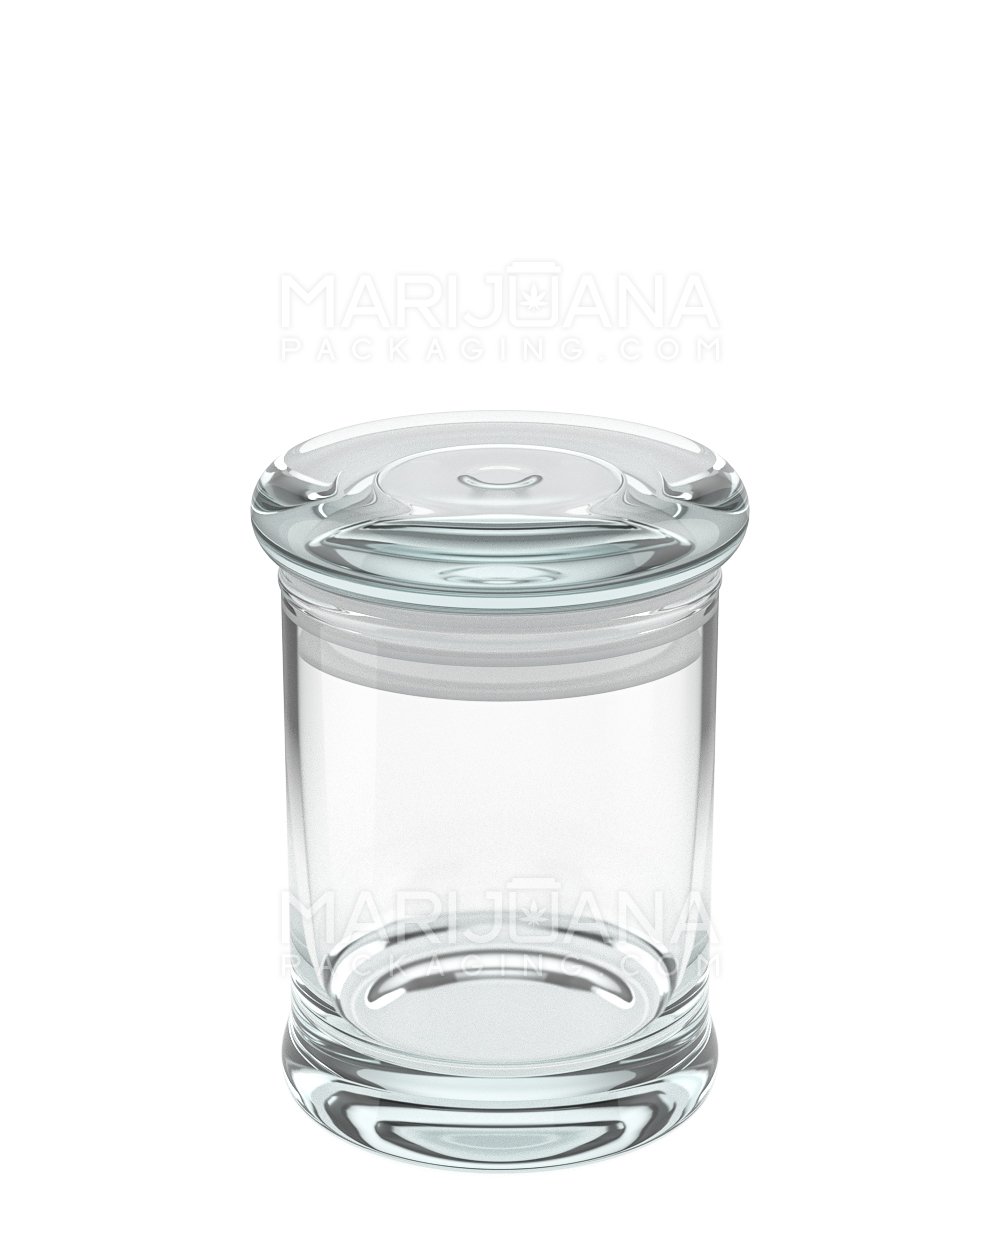 Straight Sided Clear Glass Jar with Lid | 2oz - Clear Glass - 64 Count - 6